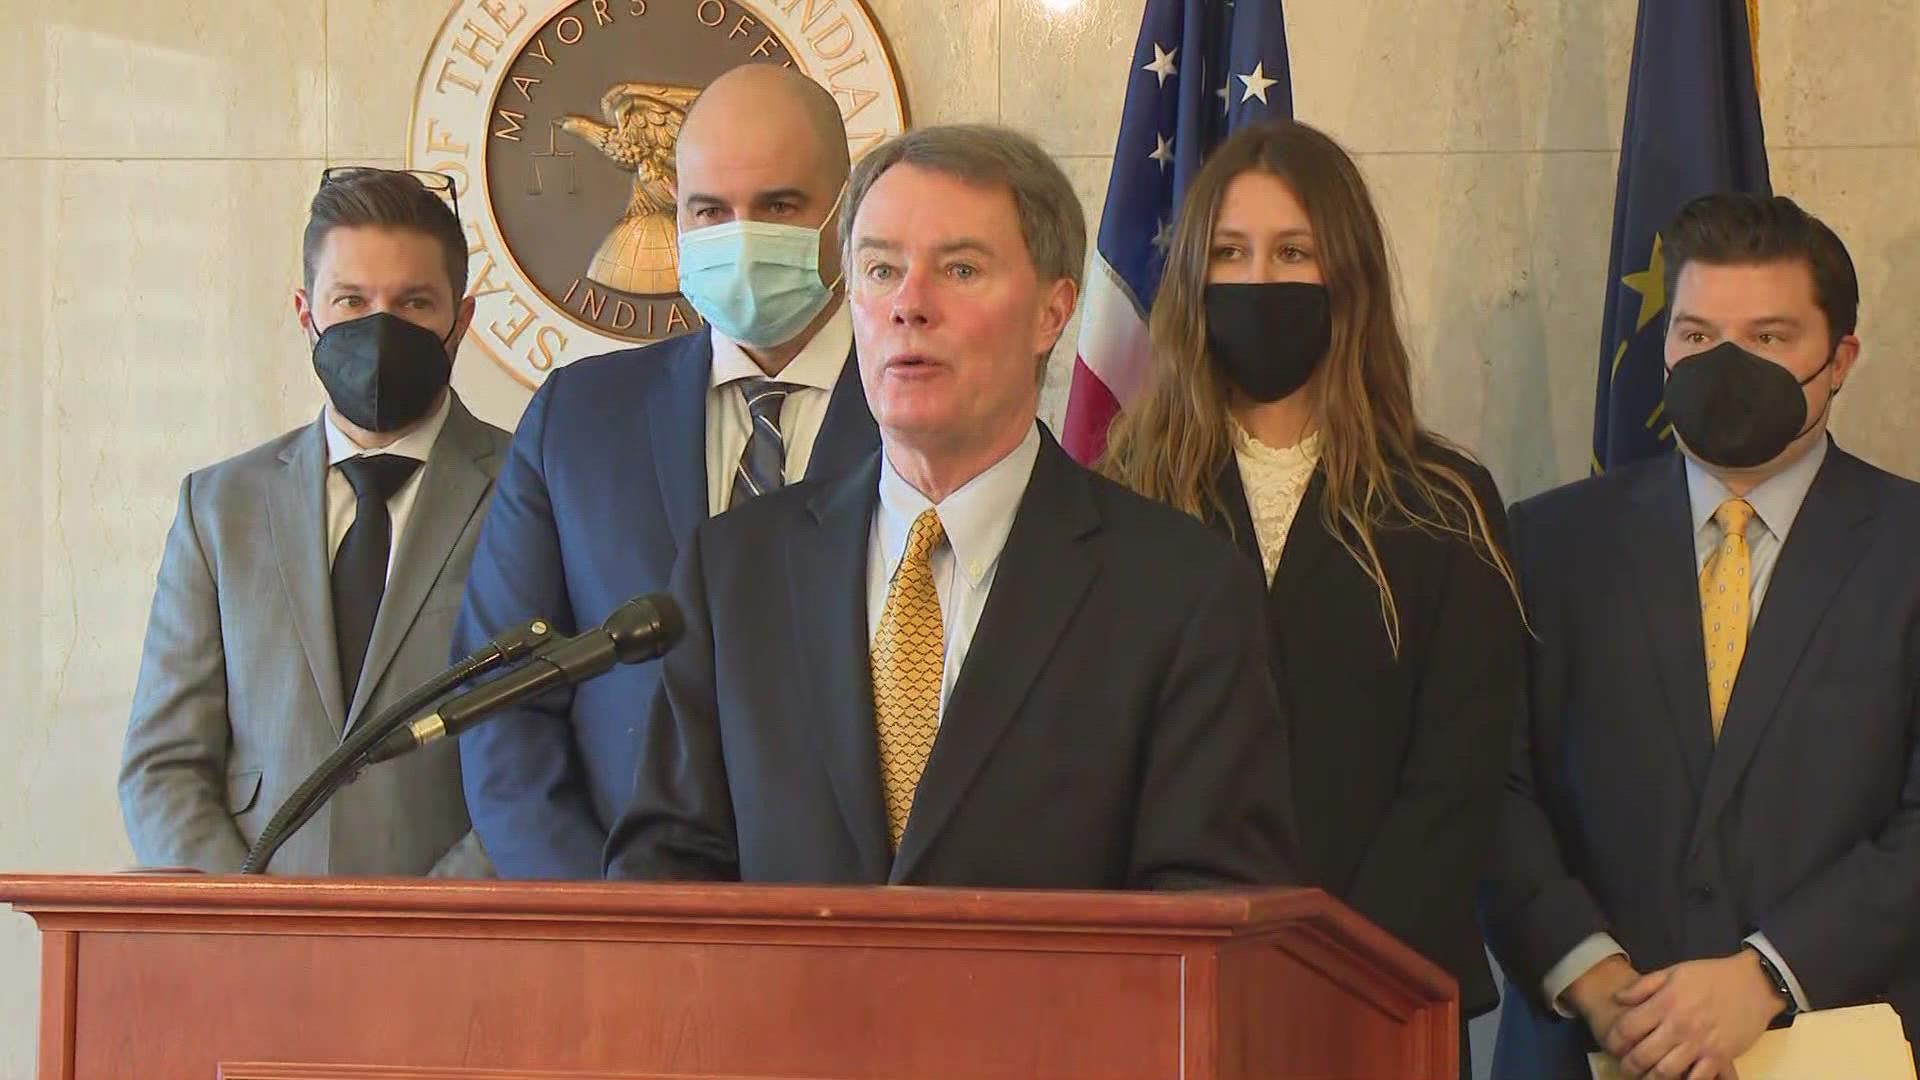 “There must be real consequences for charging Indianapolis residents to live in unacceptable, uninhabitable conditions," Indianapolis Mayor Joe Hogsett said.